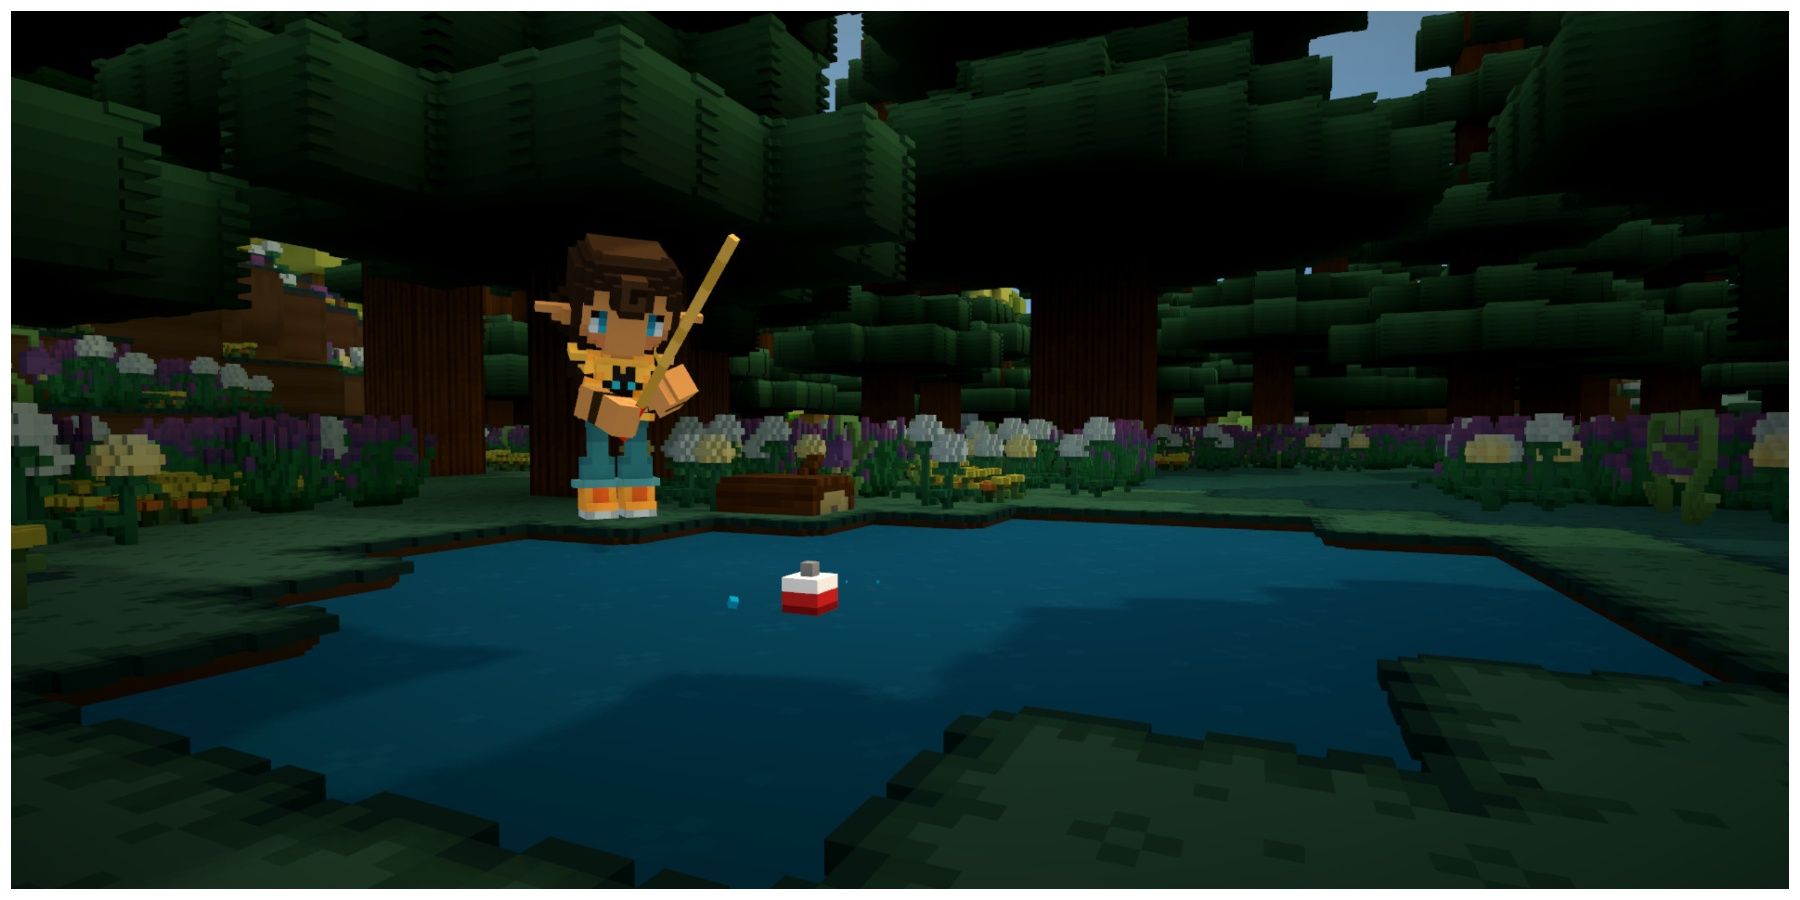 A pixelated elf fishing in a lake in the forest in Staxel